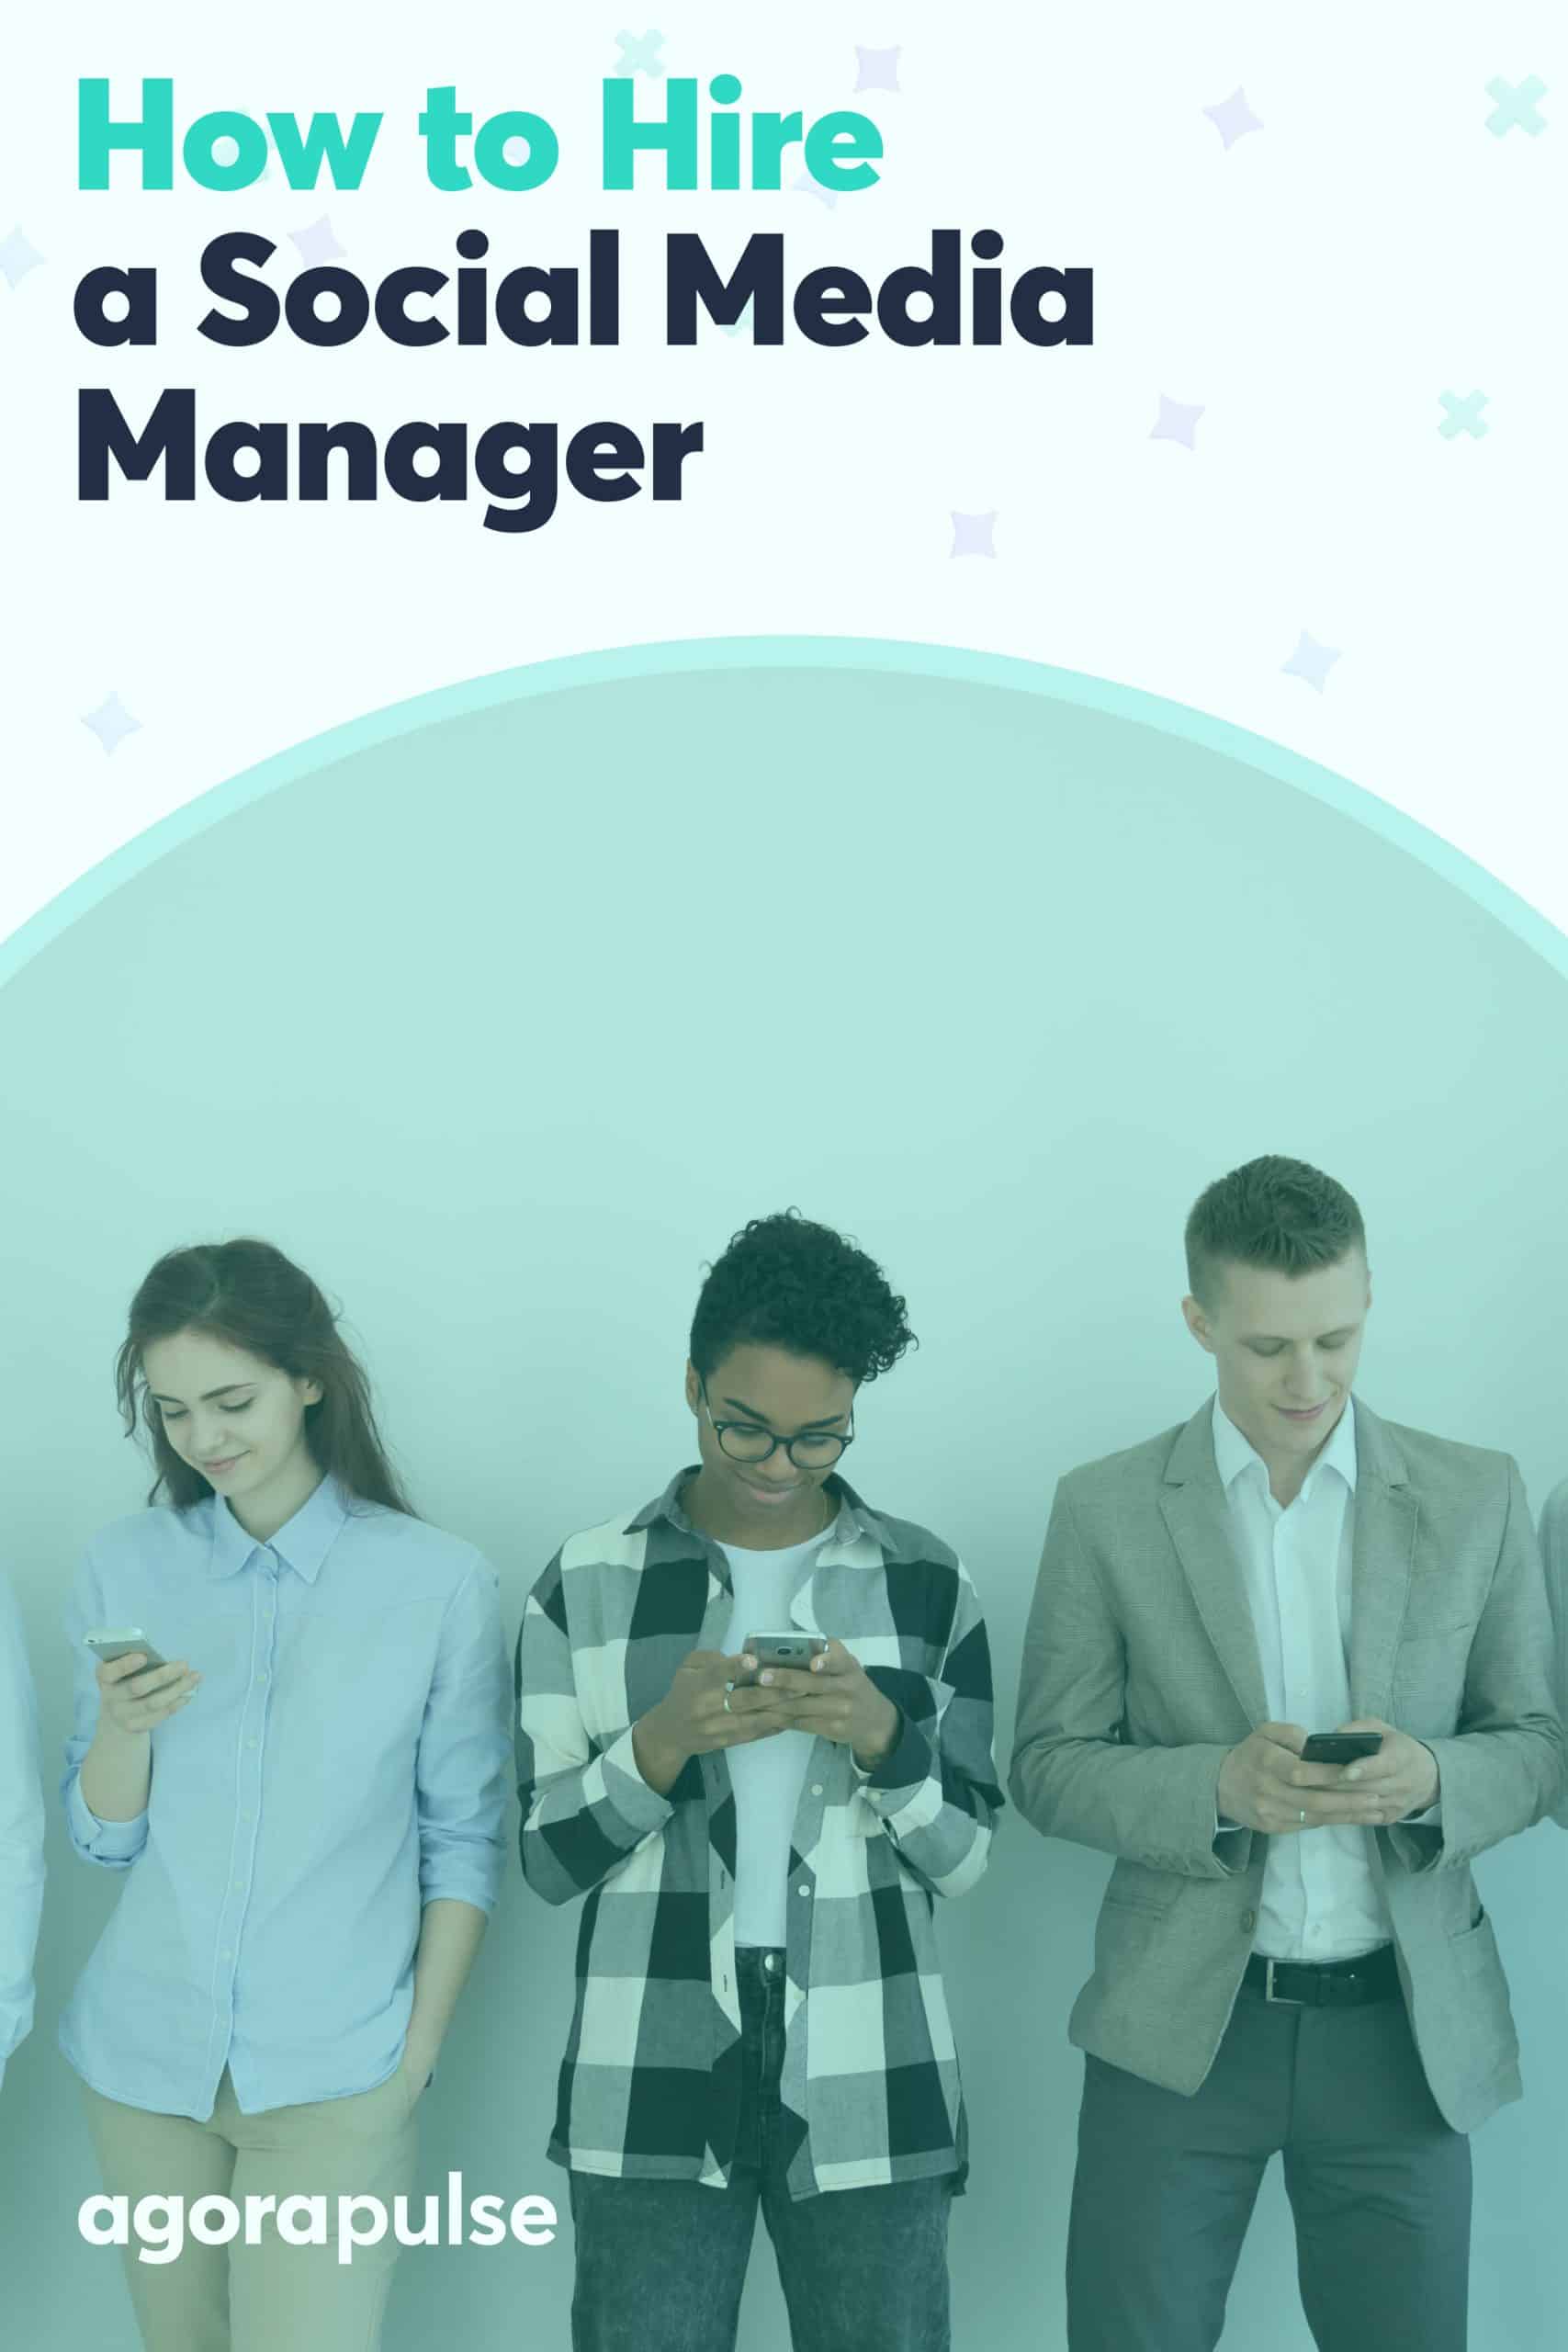 How to Hire a Social Media Manager That Suits Your Business